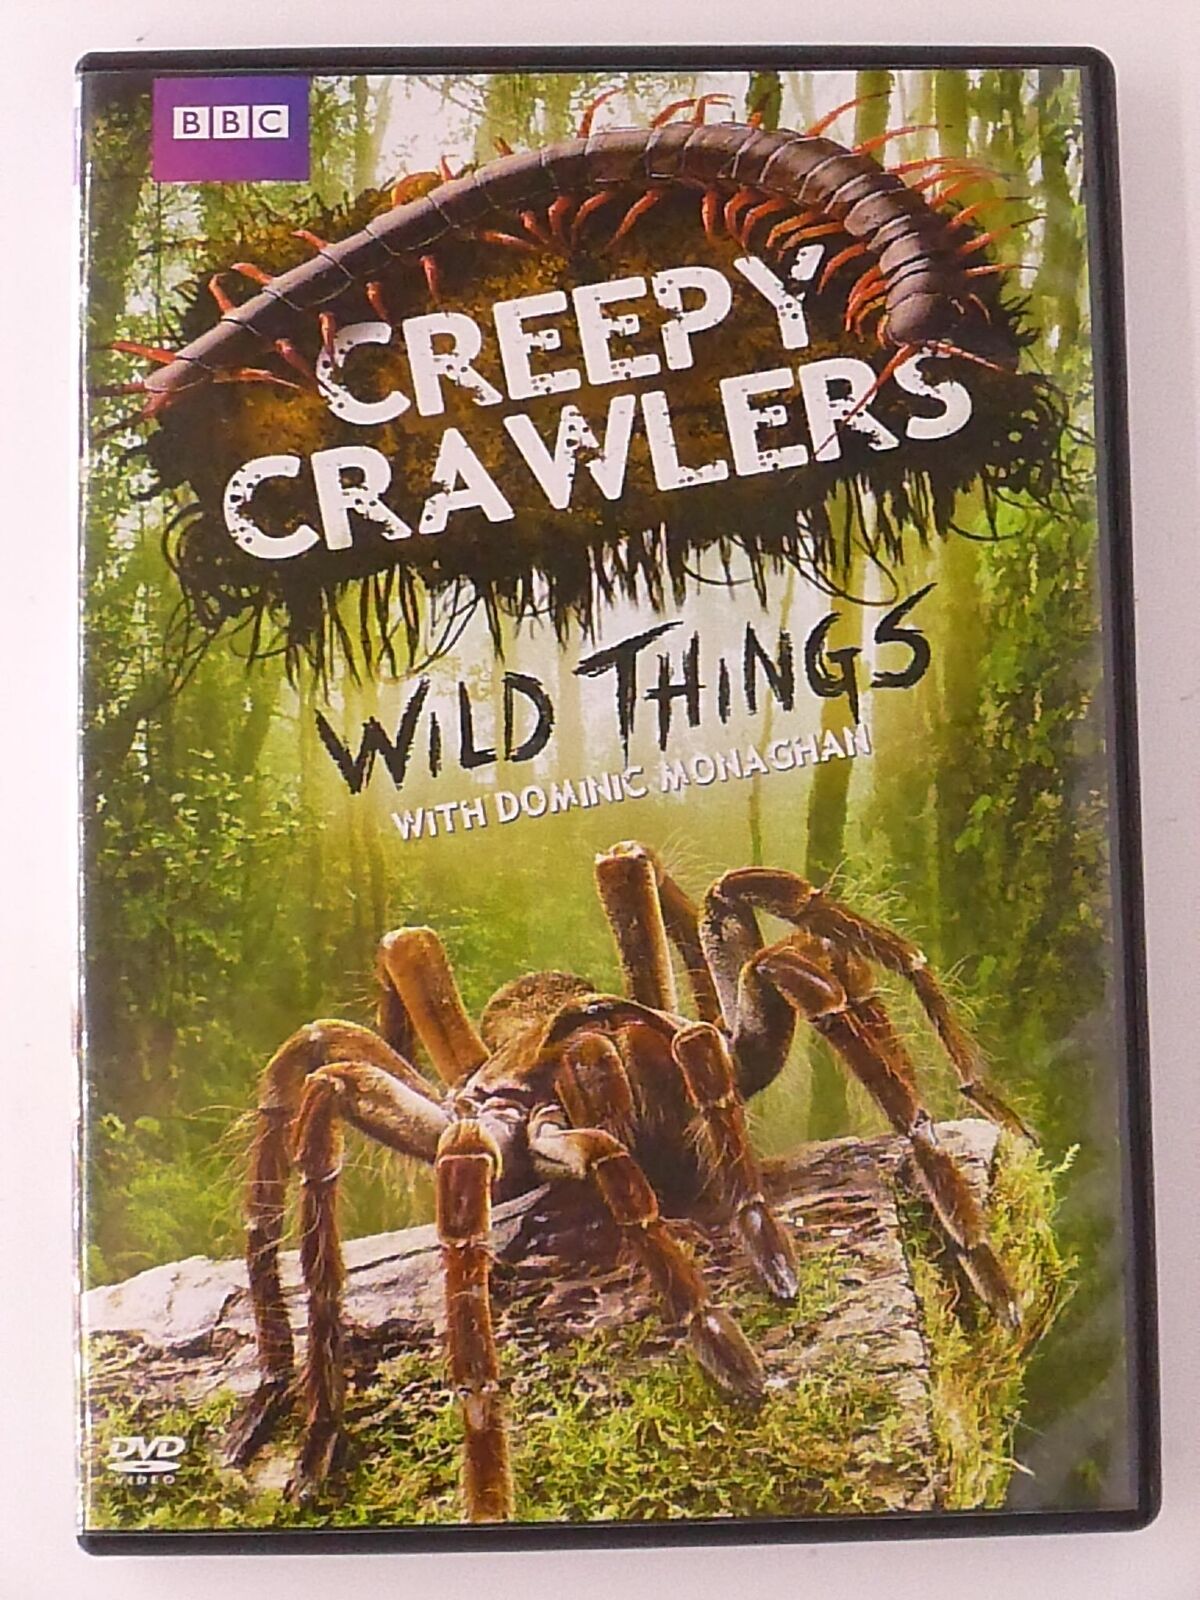 Creepy Crawlers - Wild Things with Dominic Monaghan (DVD, BBC) - I0313